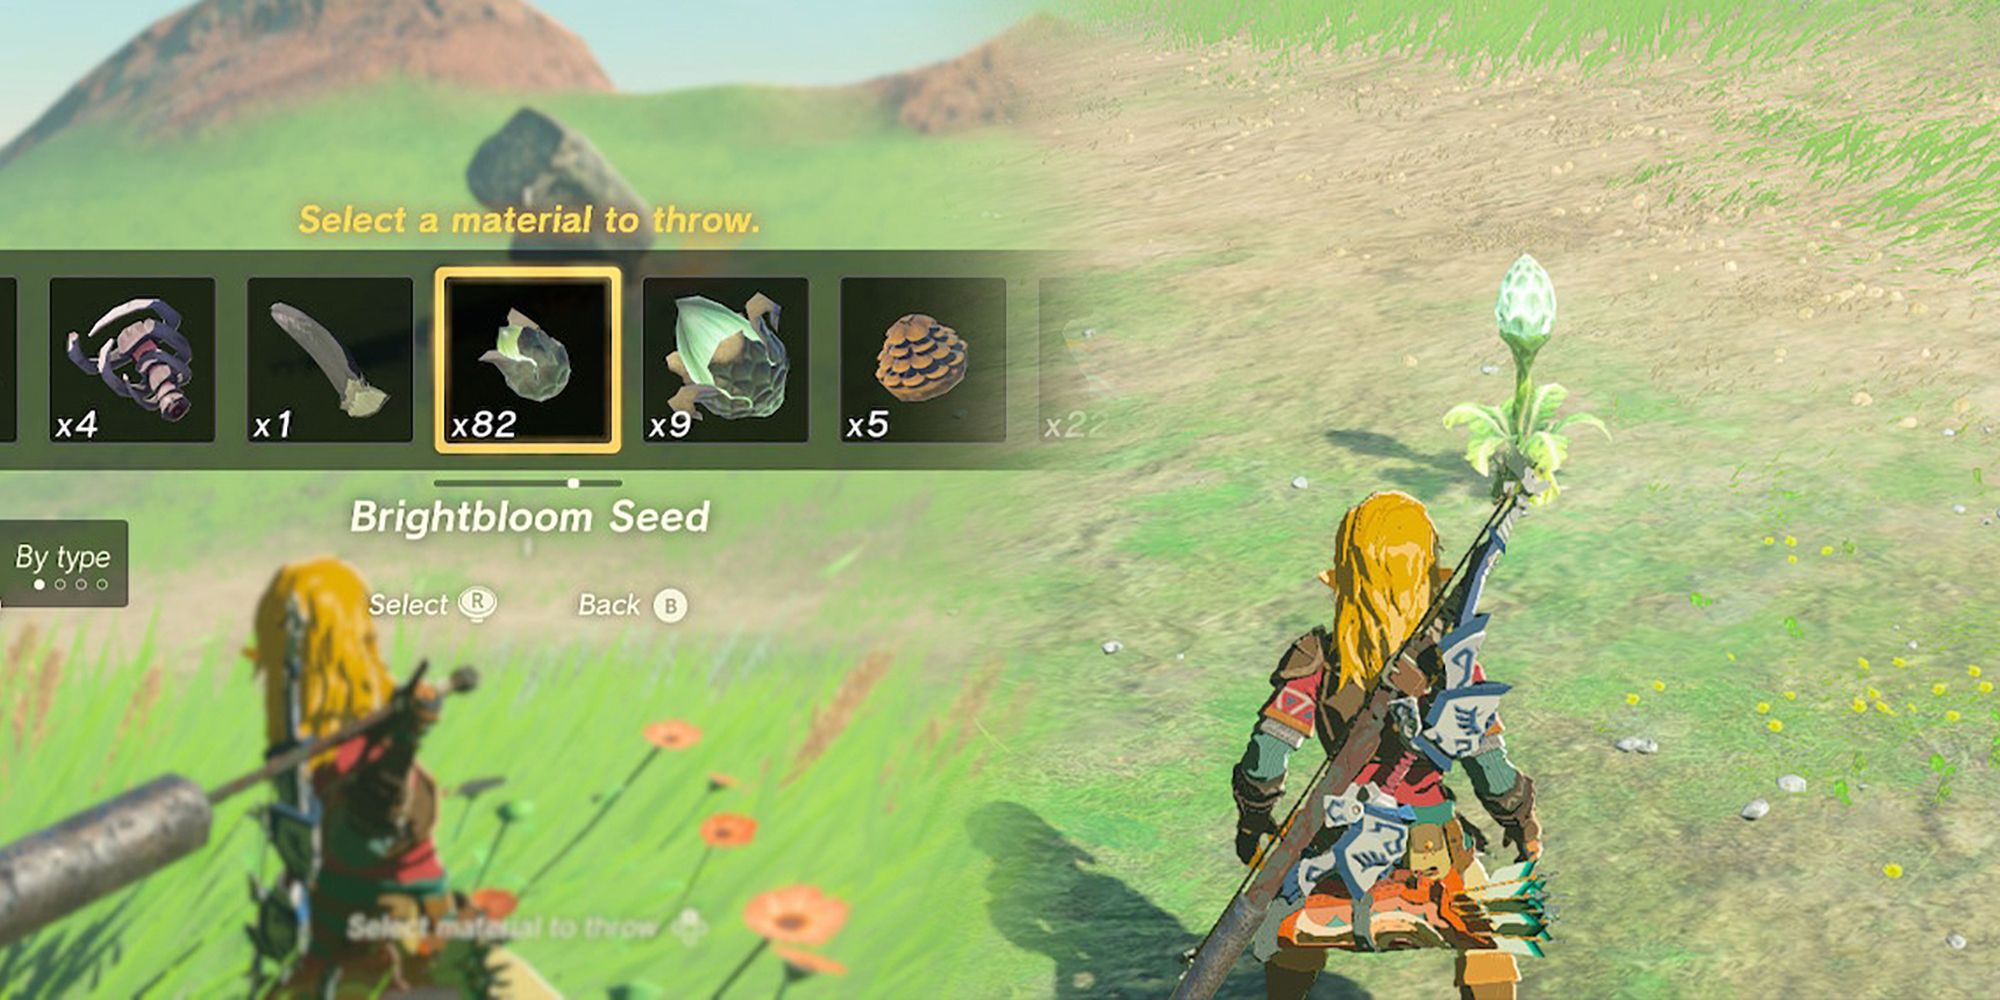 Legend of Zelda Tears of the Kingdom - Selecting And Throwing Brightbloom Seed Material Barehanded